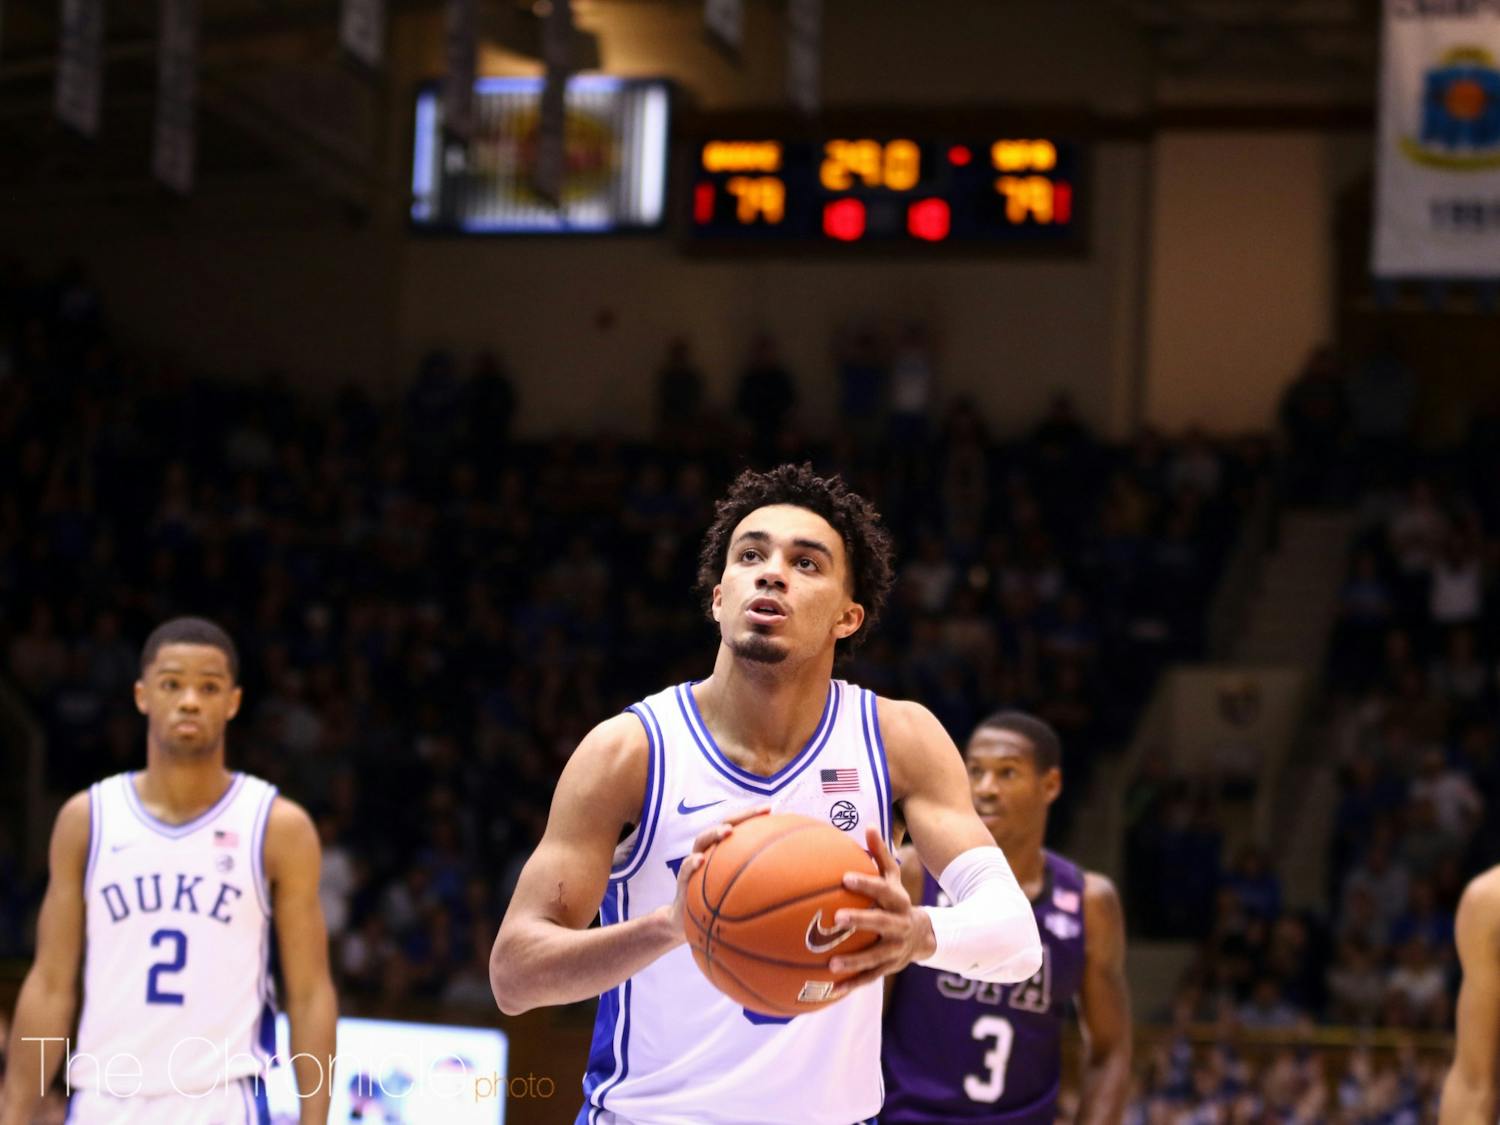 Duke loses to the Lumberjacks in Cameron Indoor in a shocking upset on November 26, 2019. &nbsp;Stephen F. Austin won on a buzzer beating layup in overtime and finished with a final score of 85-83. &nbsp;Duke will next take on Winthrop at home on November 29, 2019. &nbsp;Photos from the game were taken by Eric Wei and Erin Blanding.